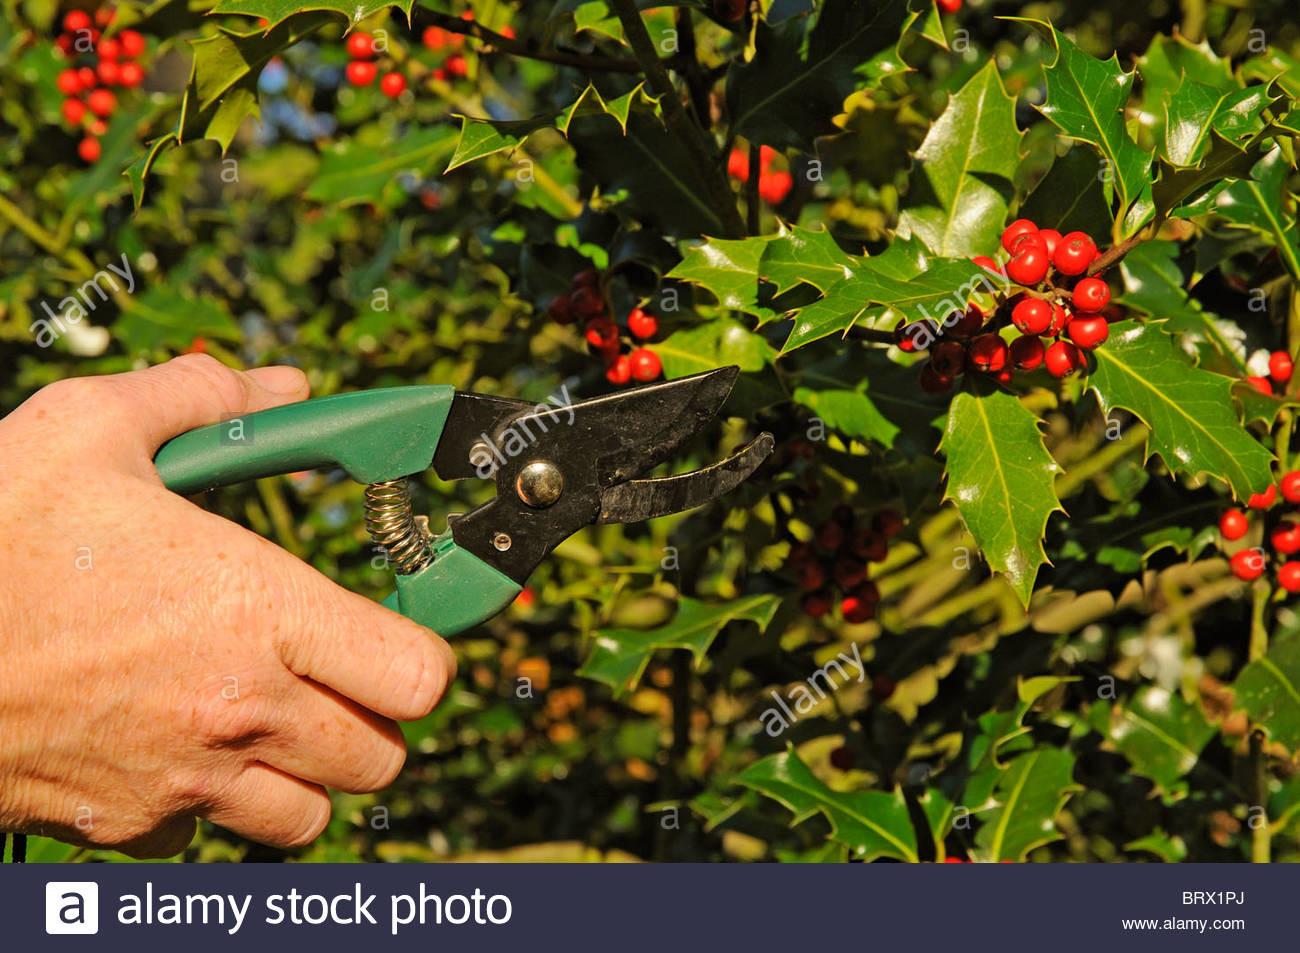 what is holly where does it come from and how did holly become associated with christmas